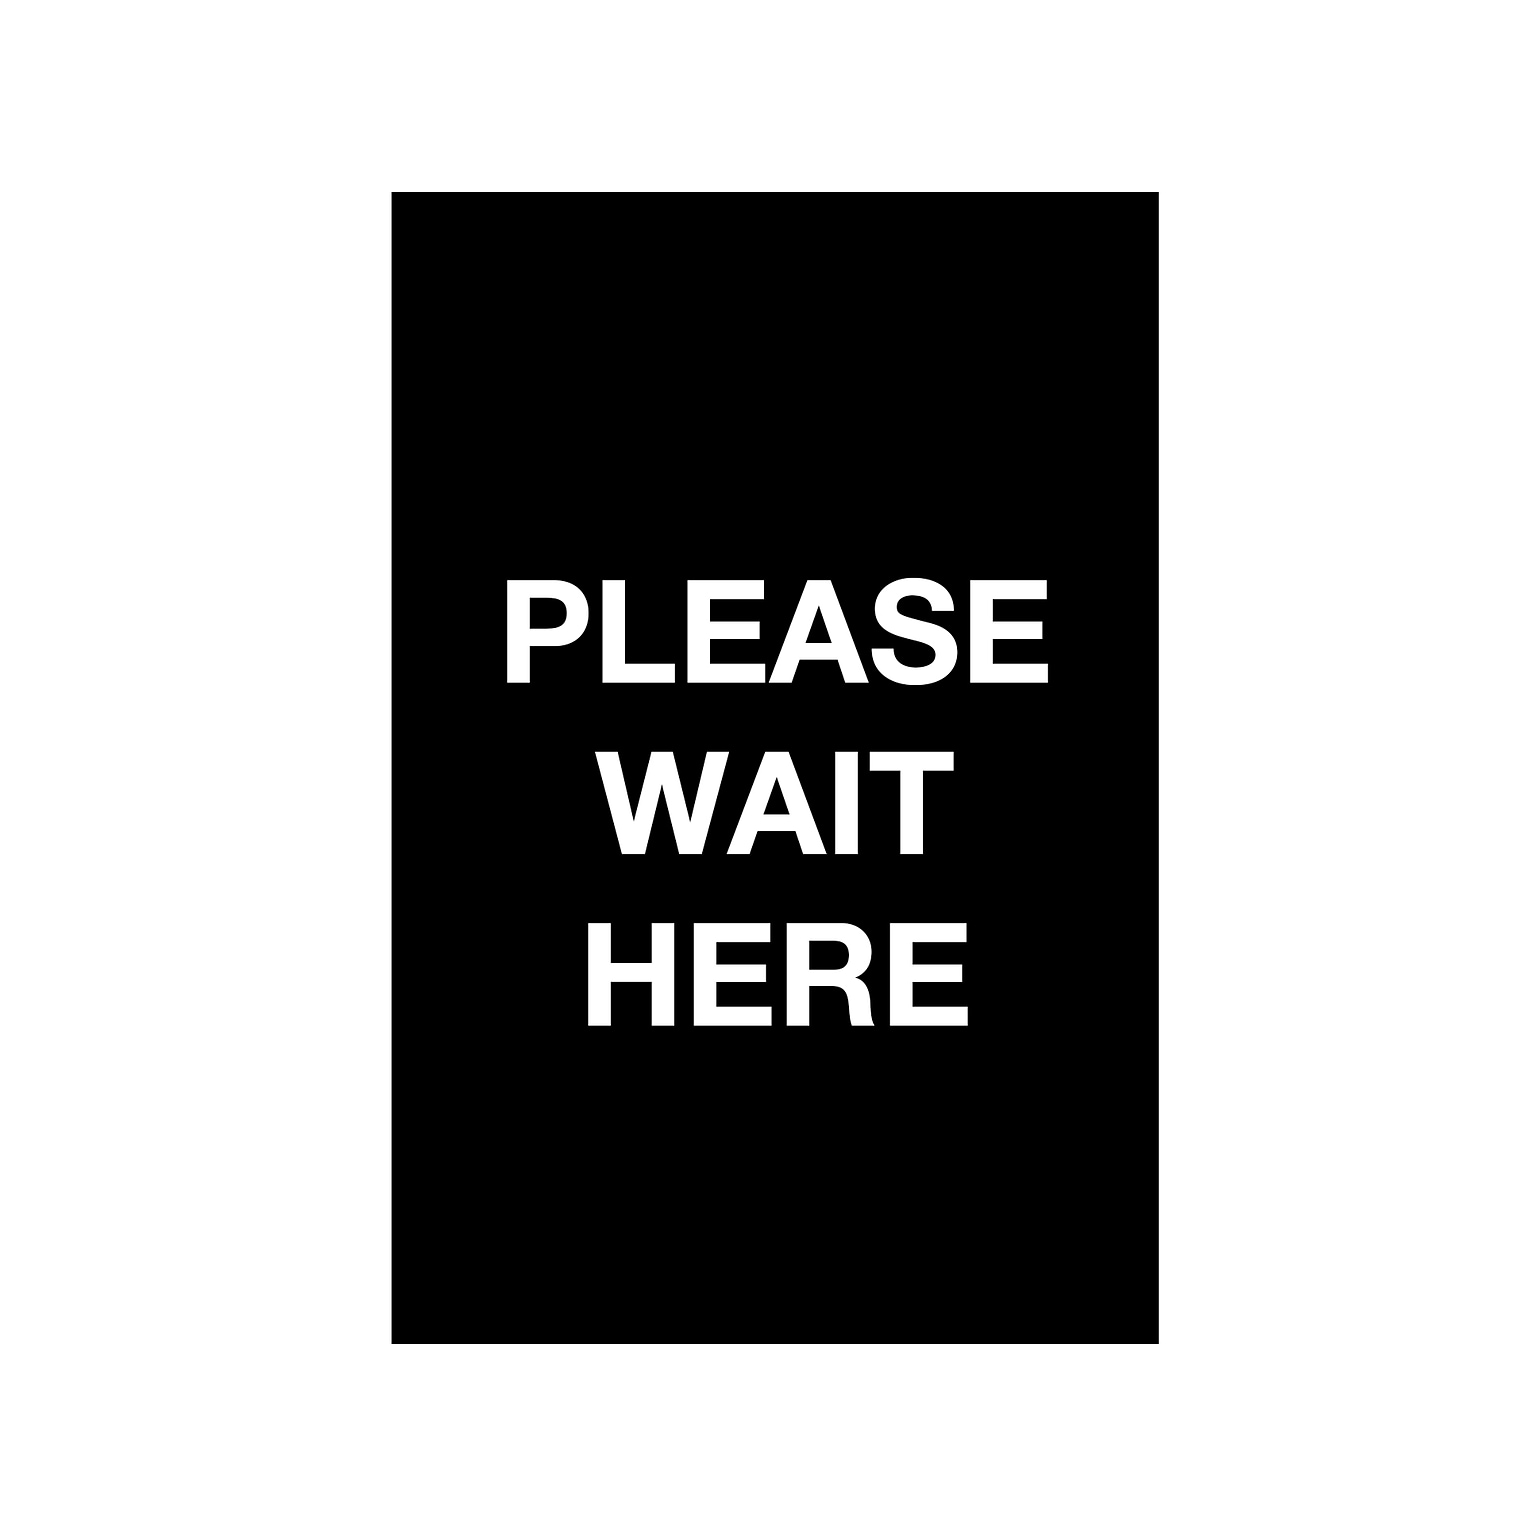 Queue Solutions Please Wait Here Temporary Traffic Control Sign, 7 x 11, Black/White (S711B-09)